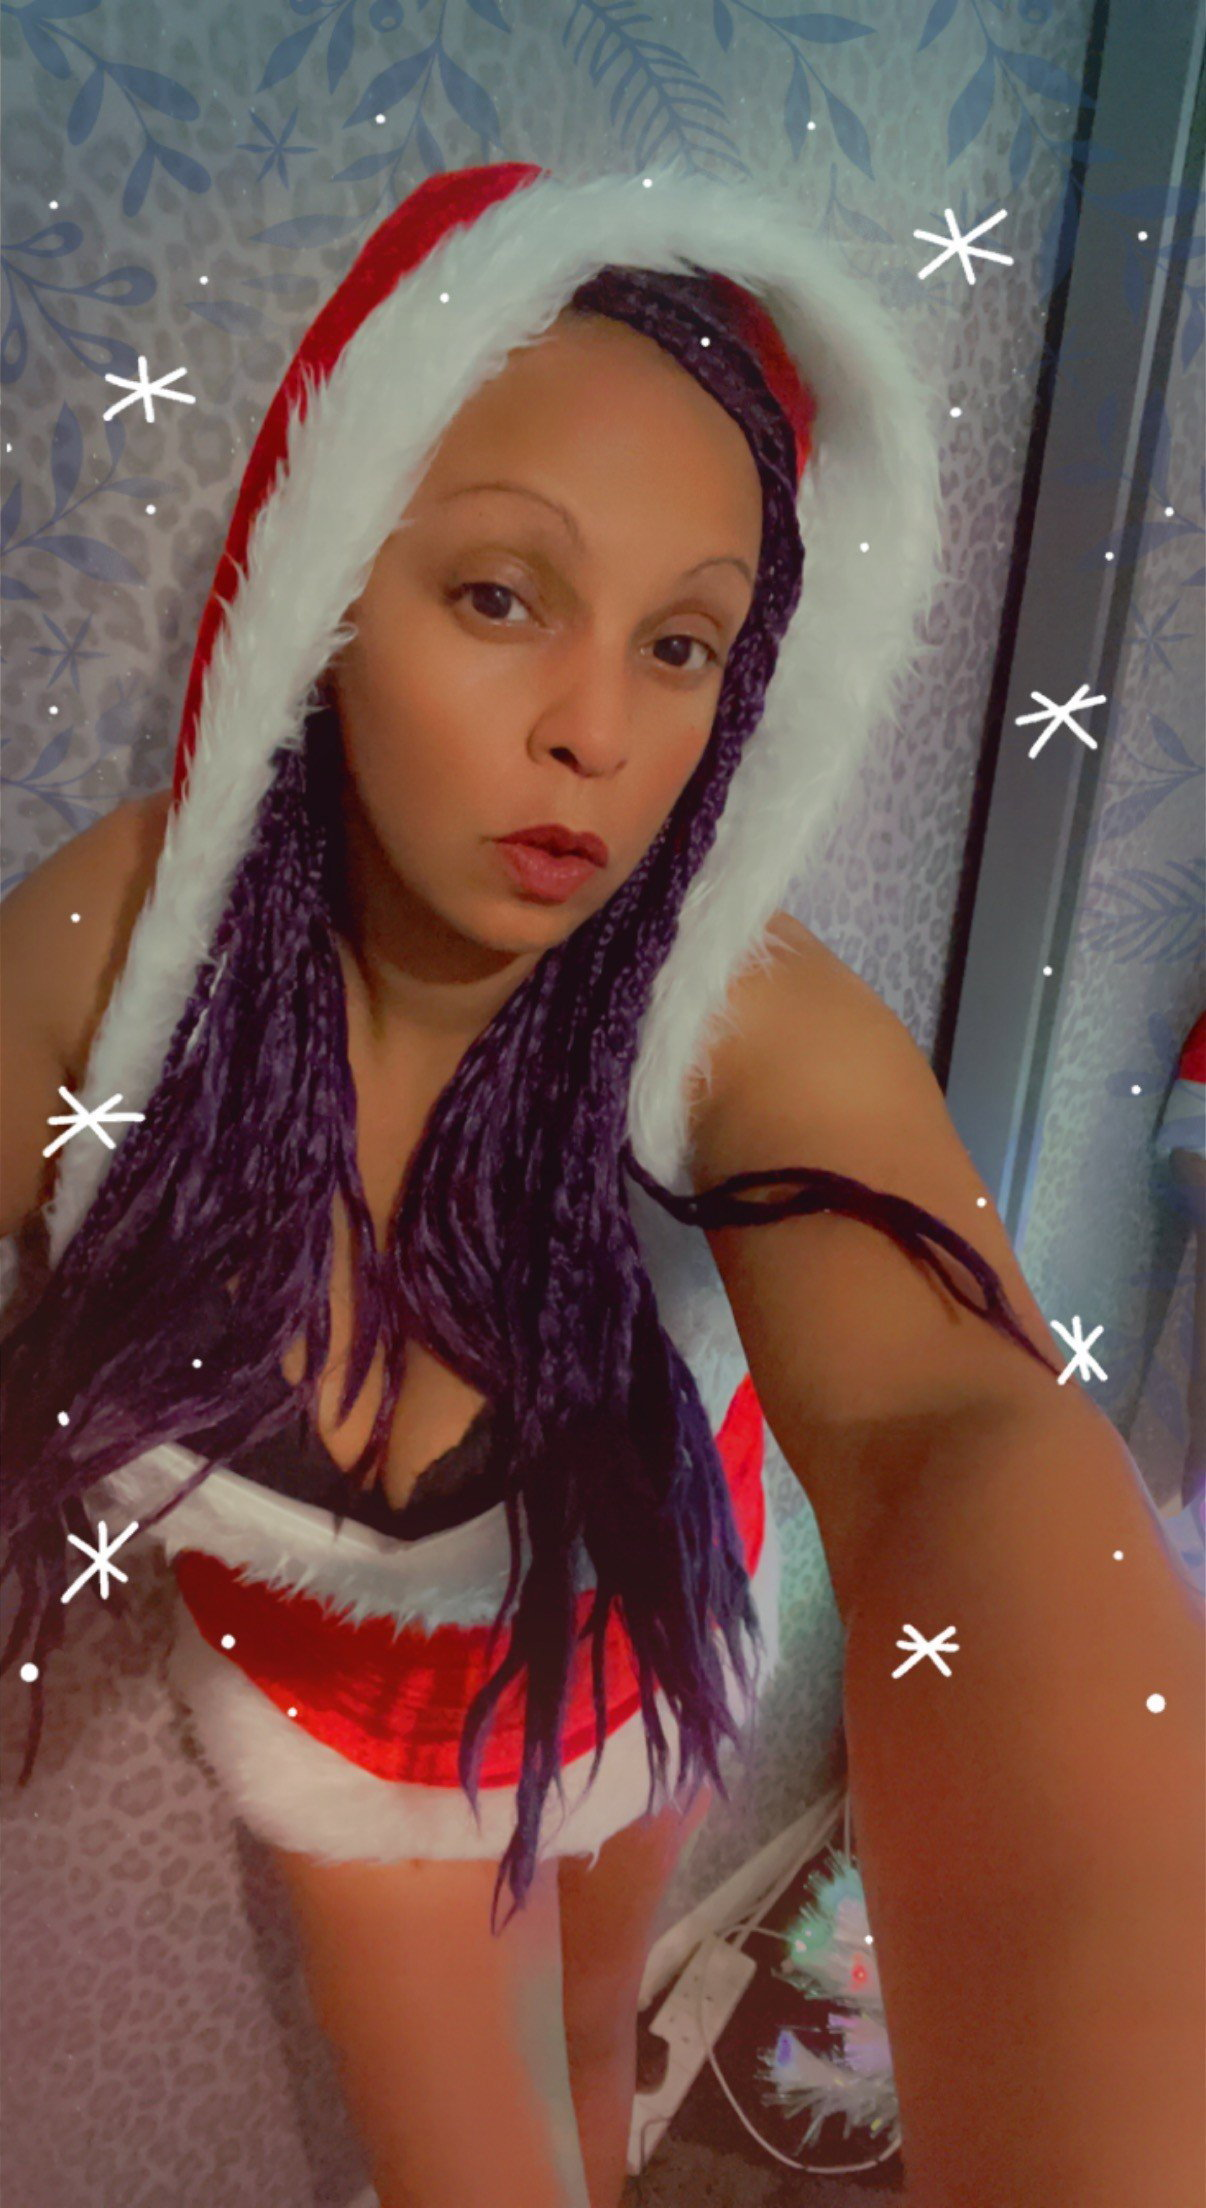 Photo by MistressMD with the username @MistressMD, who is a star user, posted on December 22, 2021 and the text says 'You may call me Mistress Claus, if you wish 🤶🏾

#BUTT I’m more for emptying sacks, stuffing cracks & getting MY stockings filled… 
With🔥FLAMES🔥 #TributeToken #crypto #FlameToken & #Wishlist gifts 🎁😘

🎄Merry Christmas Ya Filthy Animals!!! 🎅🏾 ...'